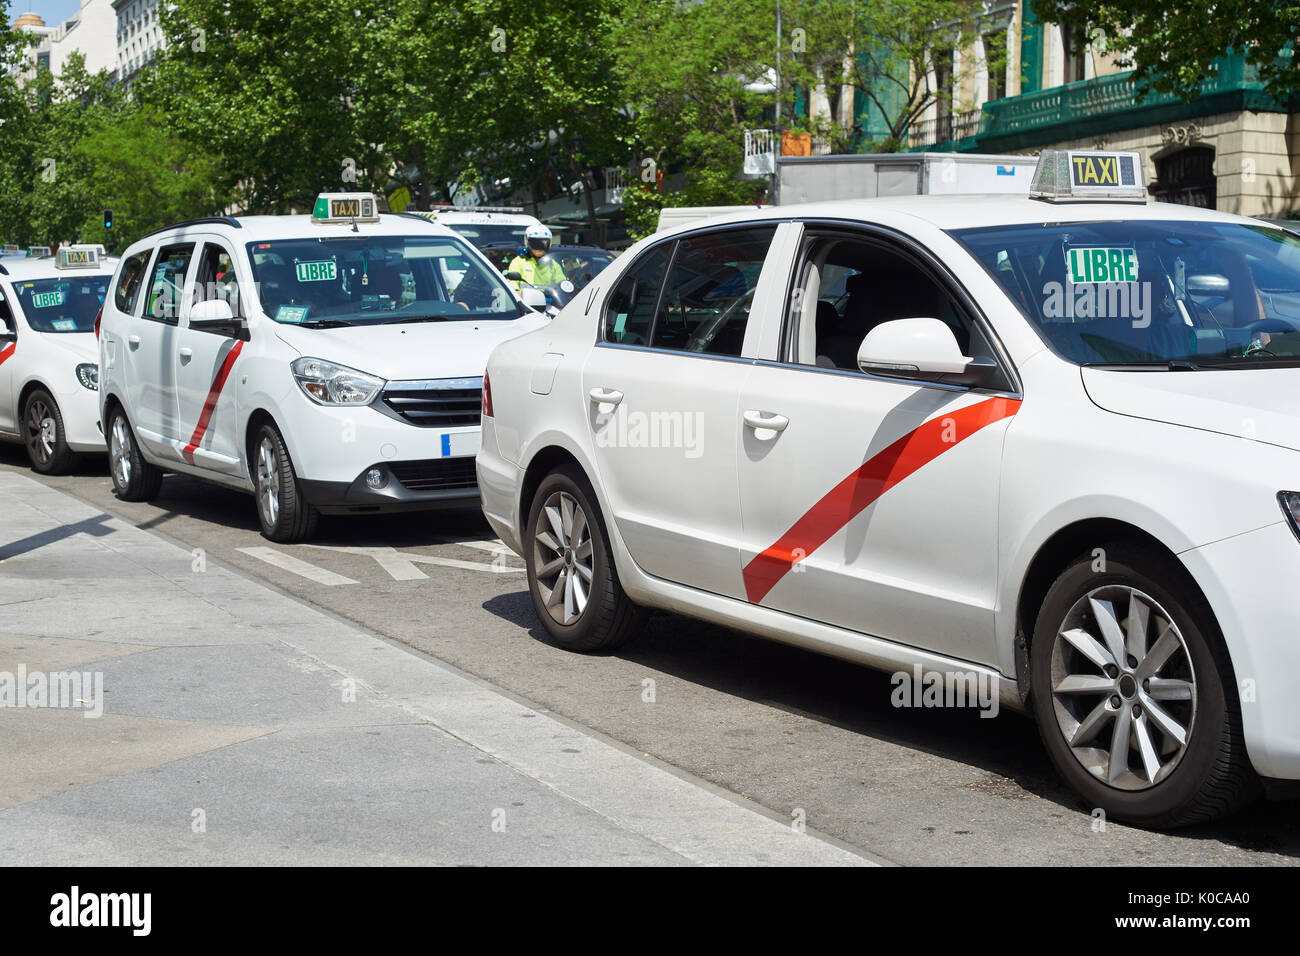 White taxi cars on Madrid street Stock Photo